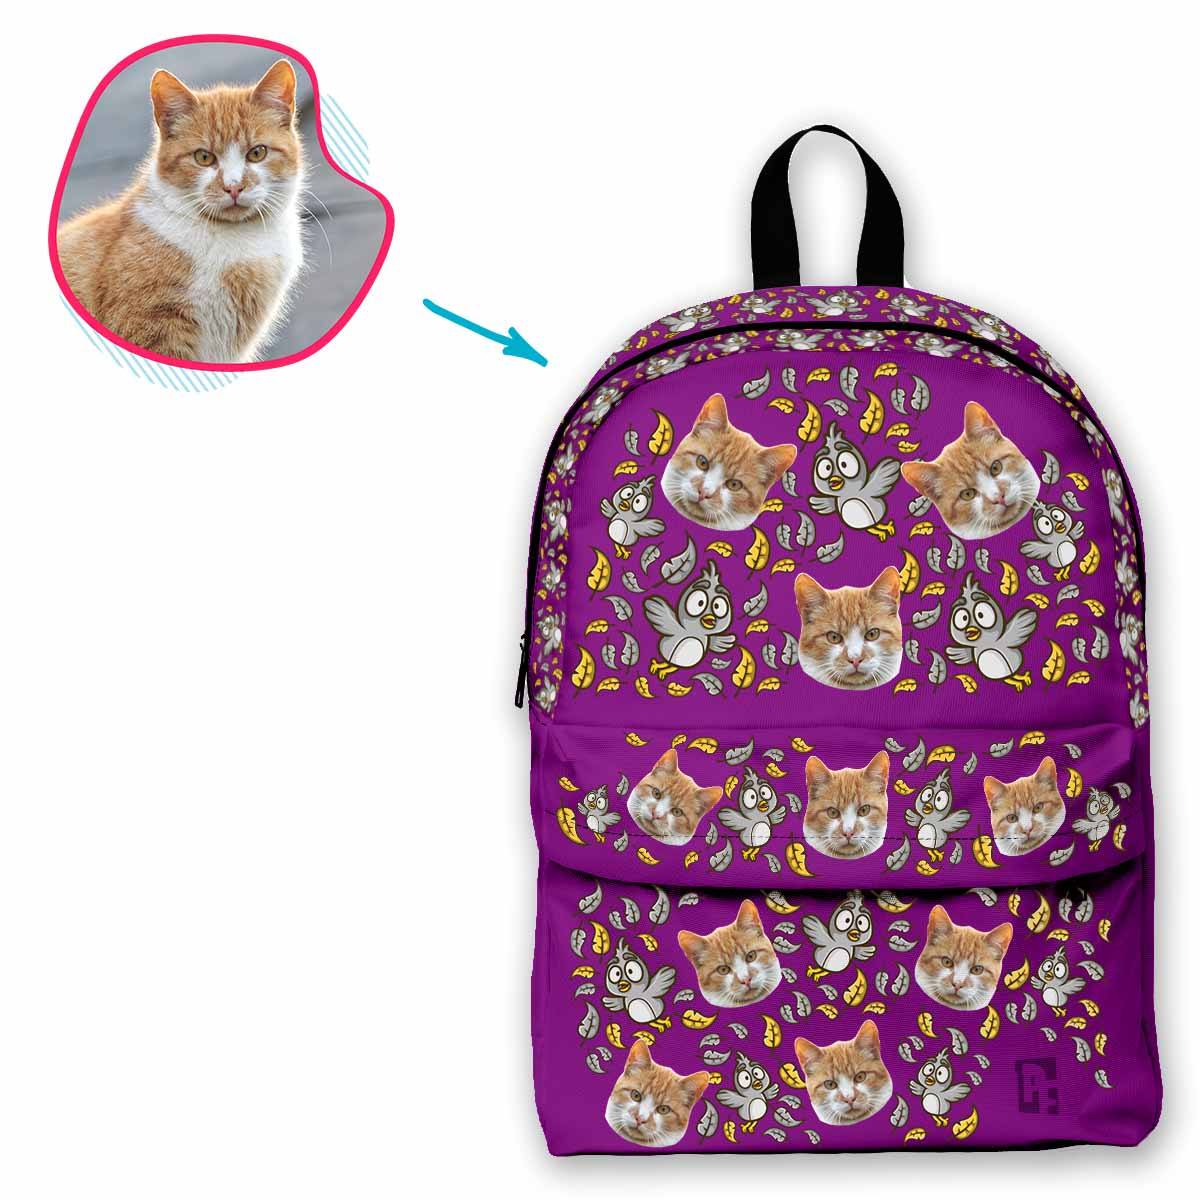 purple Bird classic backpack personalized with photo of face printed on it